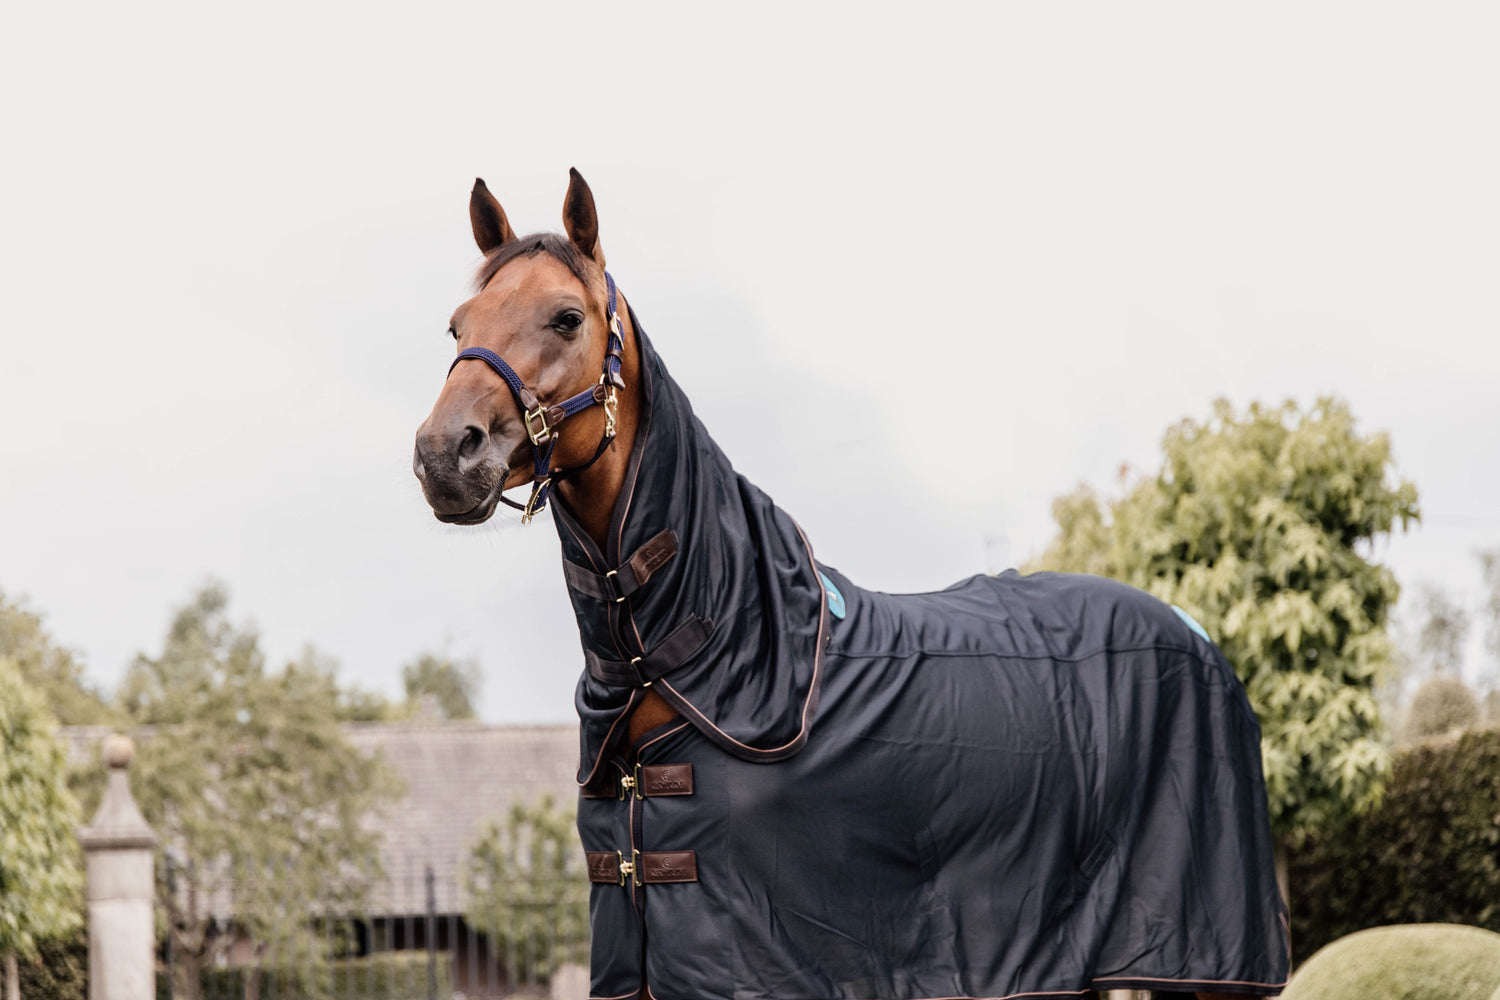 This Magnetic Neck Recuptex uses the same Recuptex fabric technology that has proven to be state of the art. Based on the Bekaert BEKINOX® technology, they contain the finest inox yarn (a stainless-steel fiber) that is woven into the fabric. It creates a Faraday cage which reflects the magnetic fields created in the horse&